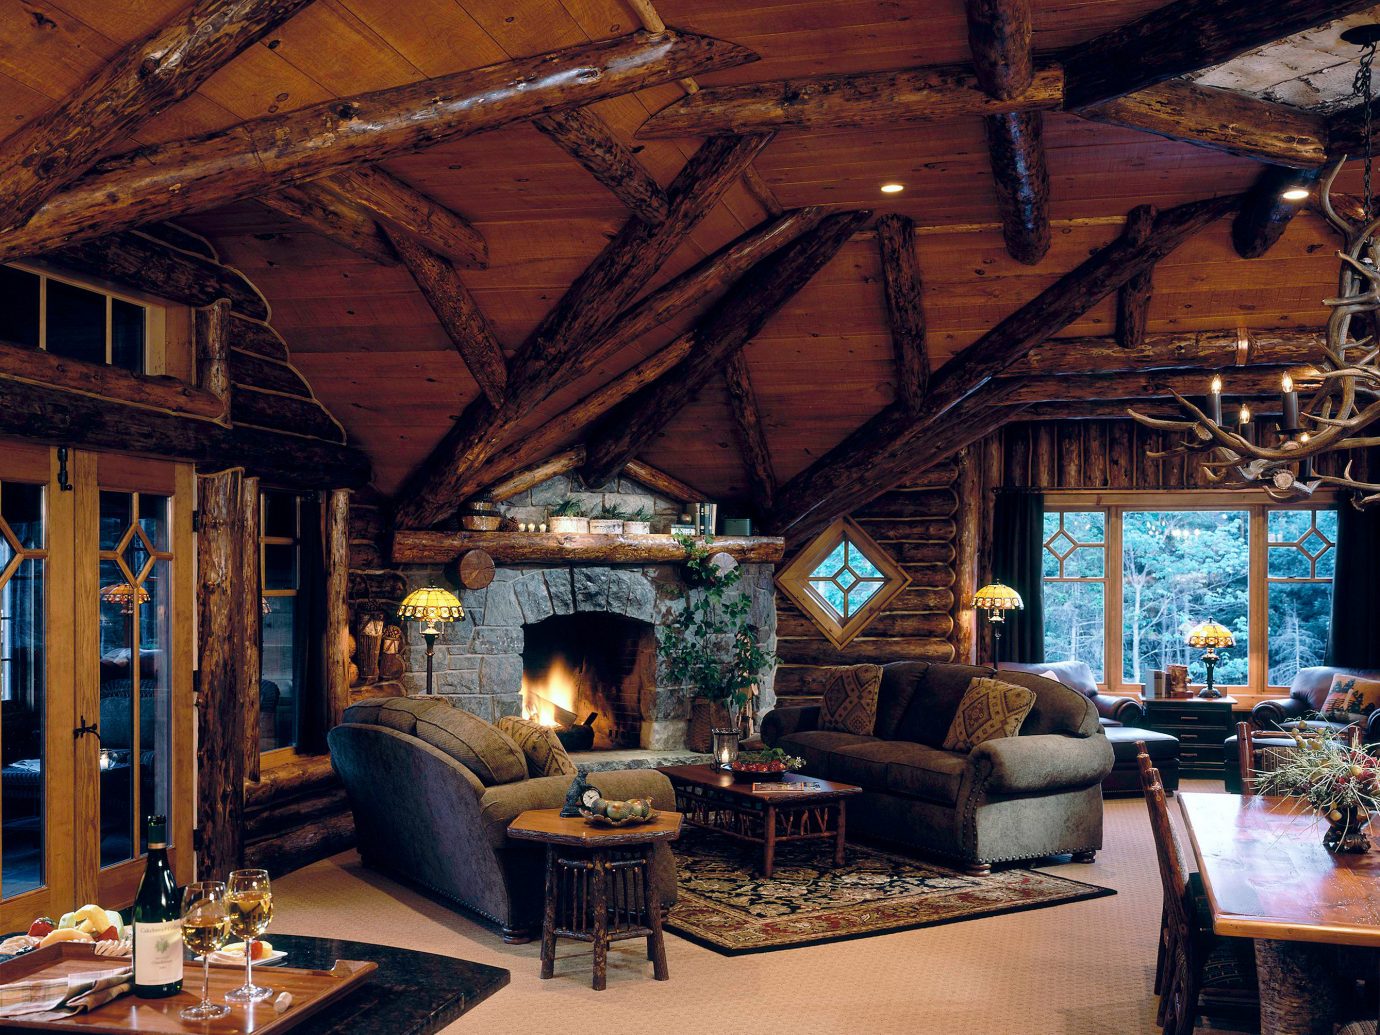 Hotels Living Lodge Lounge Luxury New York Romantic Romantic Hotels Rustic indoor ceiling room property building house estate living room home log cabin interior design wood cottage outdoor structure furniture area